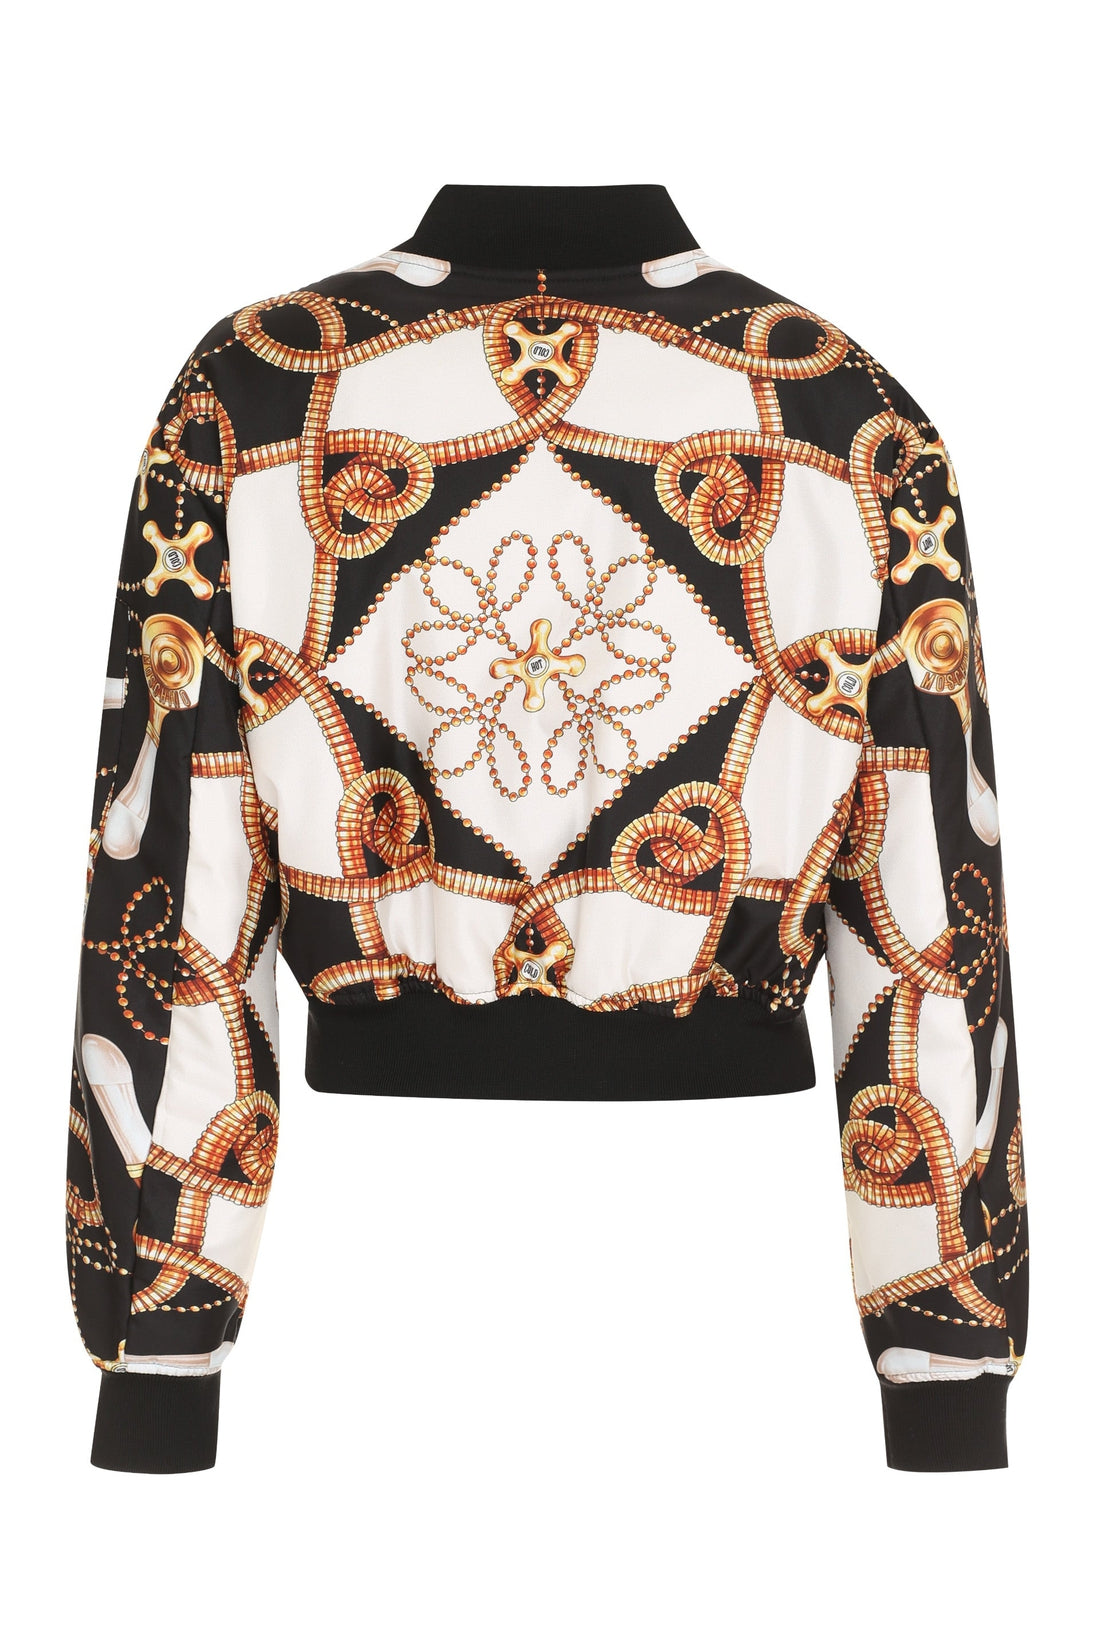 Moschino-OUTLET-SALE-Printed bomber jacket-ARCHIVIST